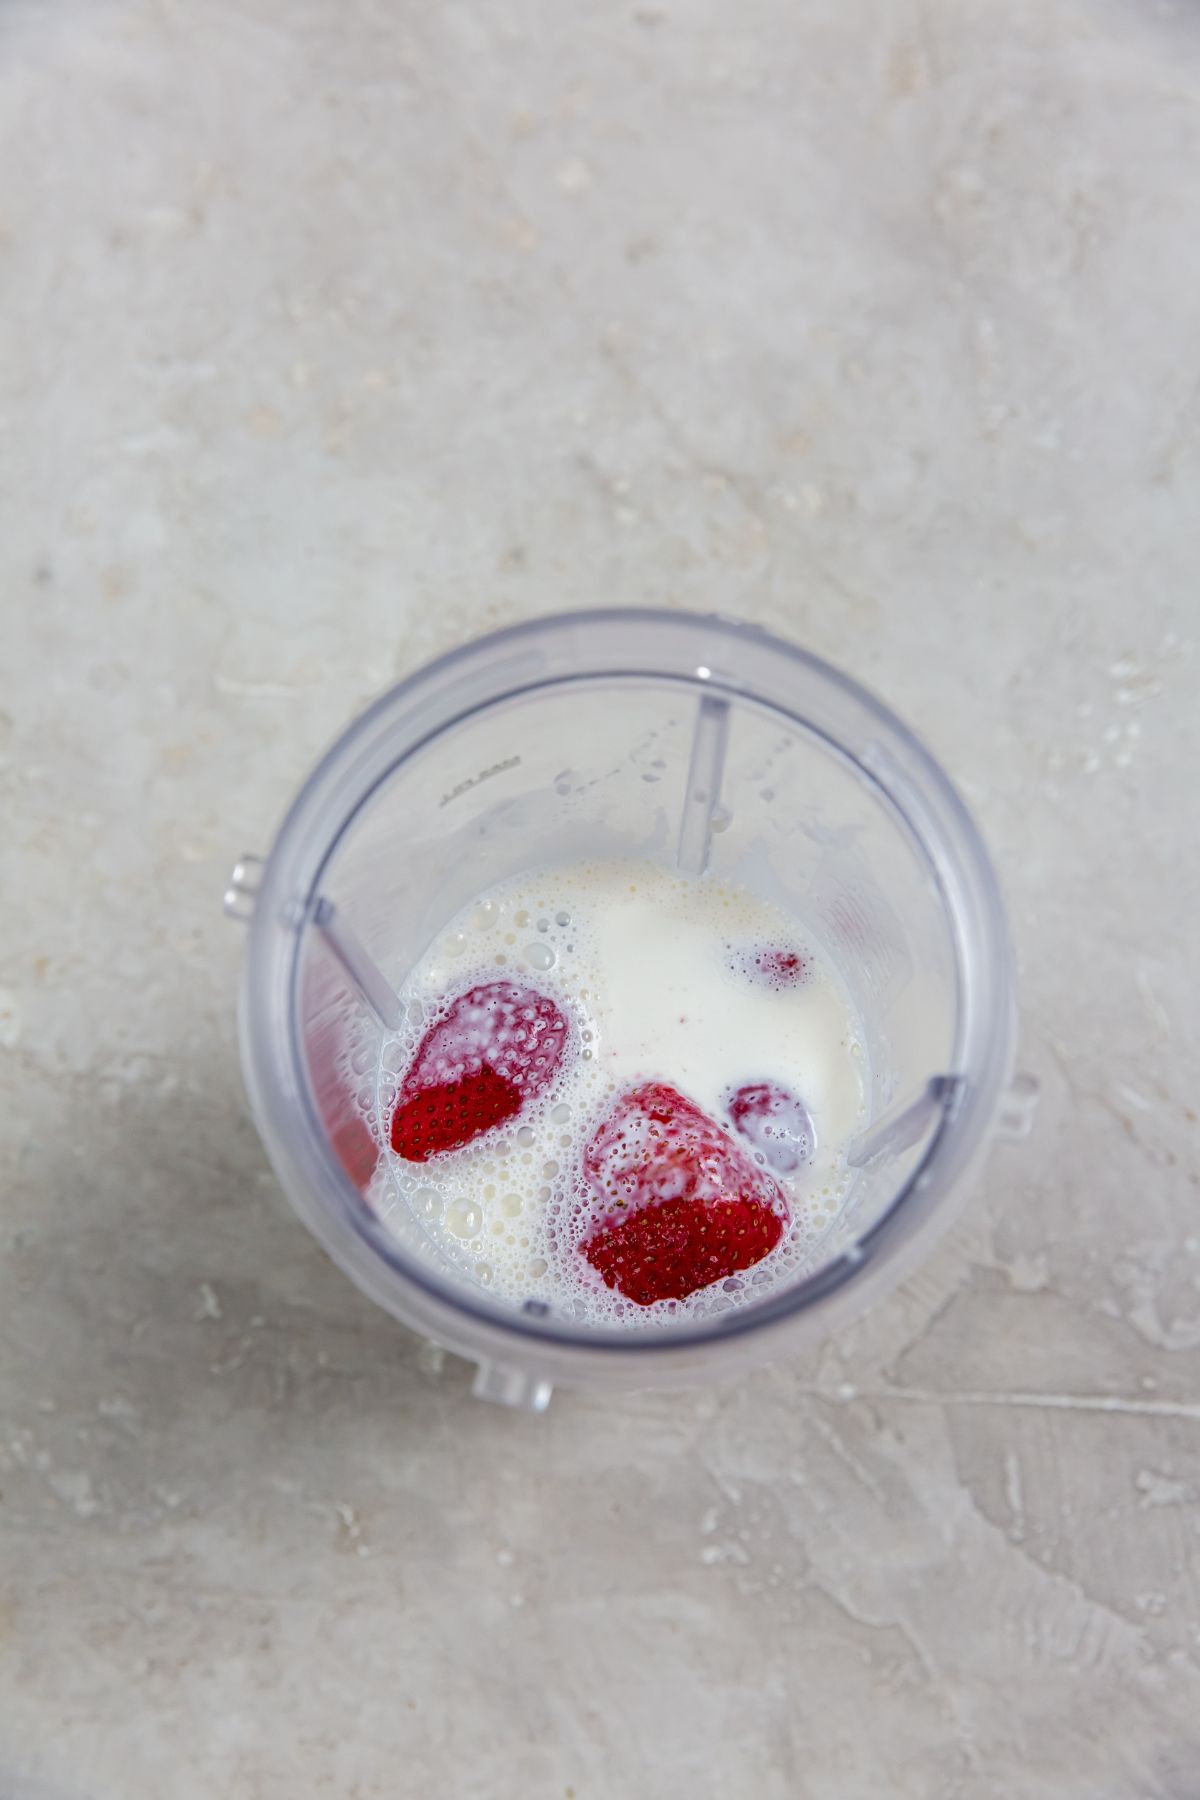 strawberries and heavy cream in a plastic cup